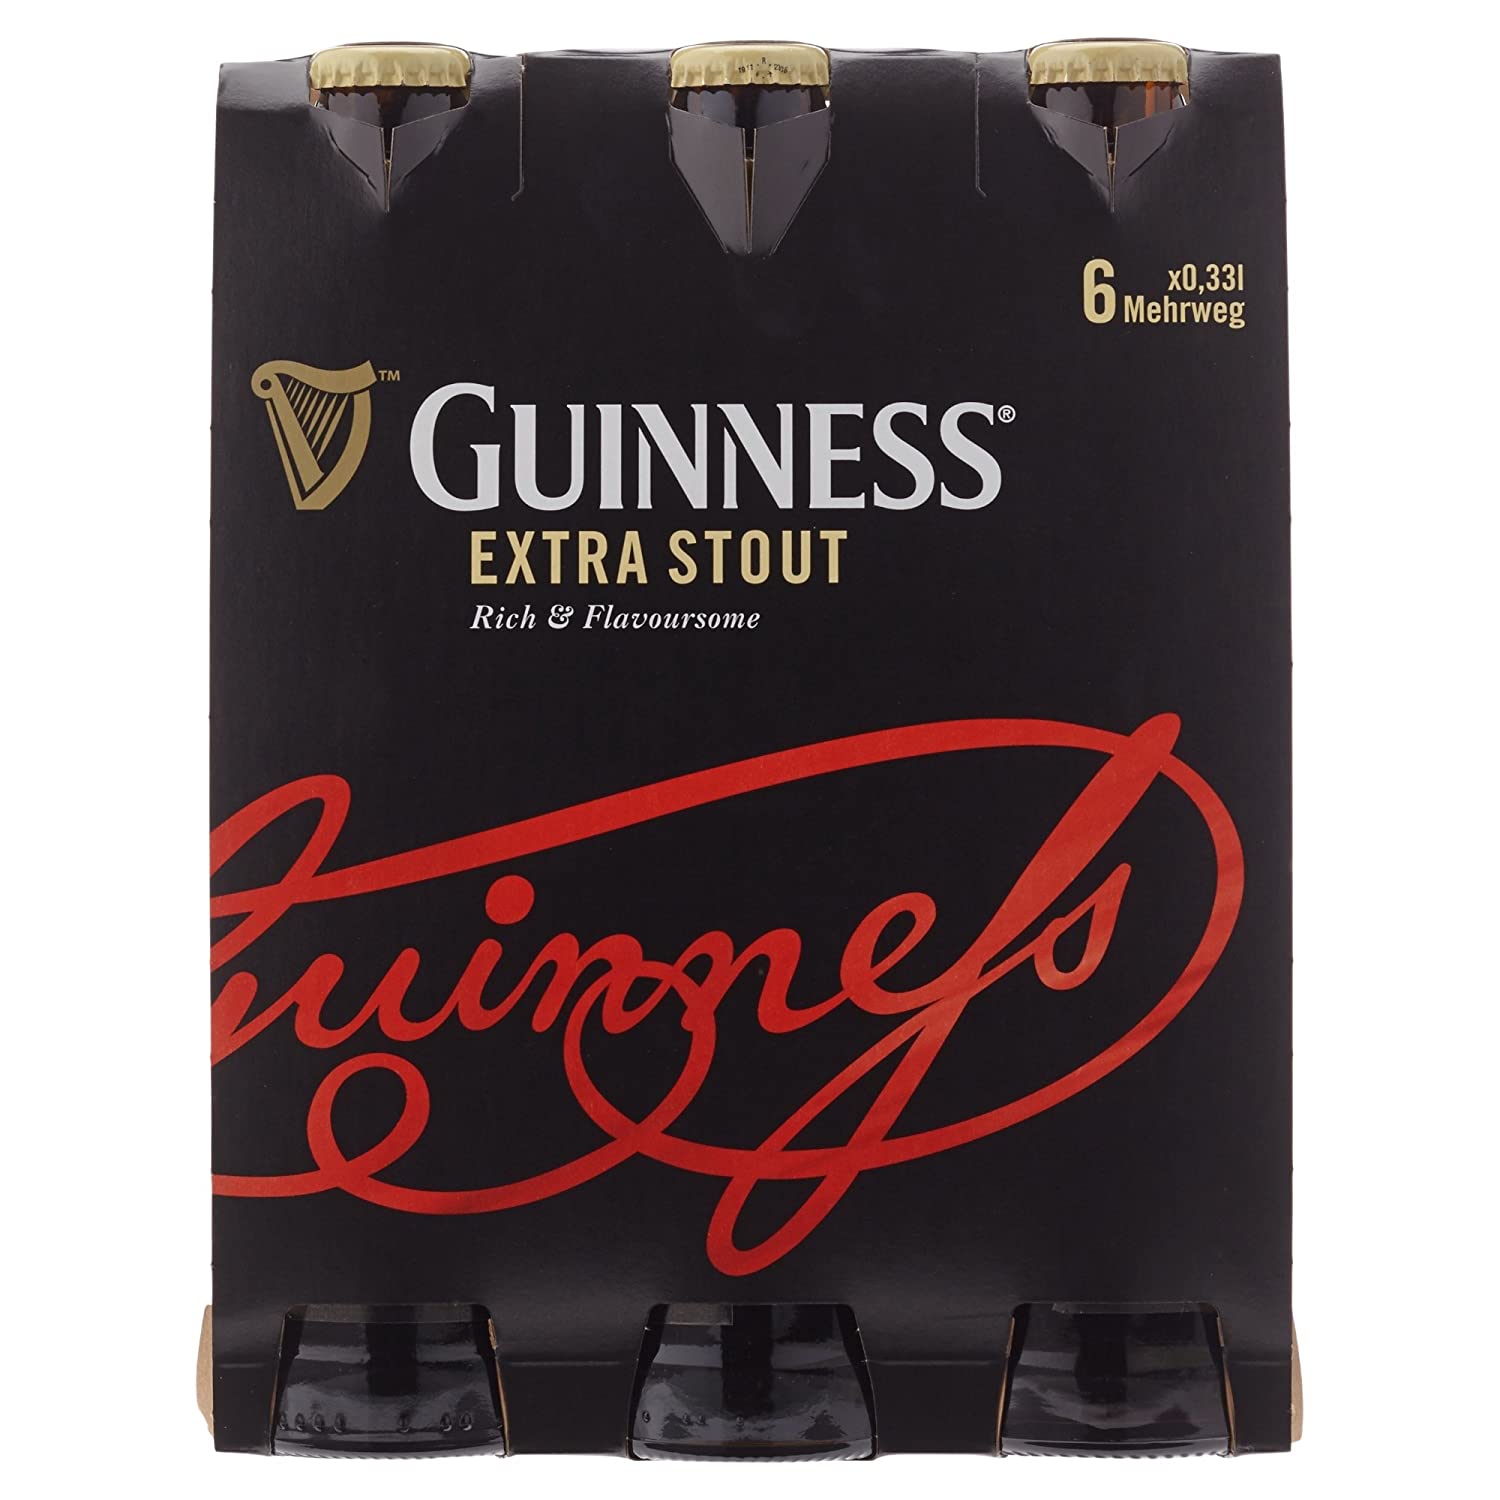 Guinness Foreign Extra Stout 0,33l - Nigeria mit 7,5% Vol.